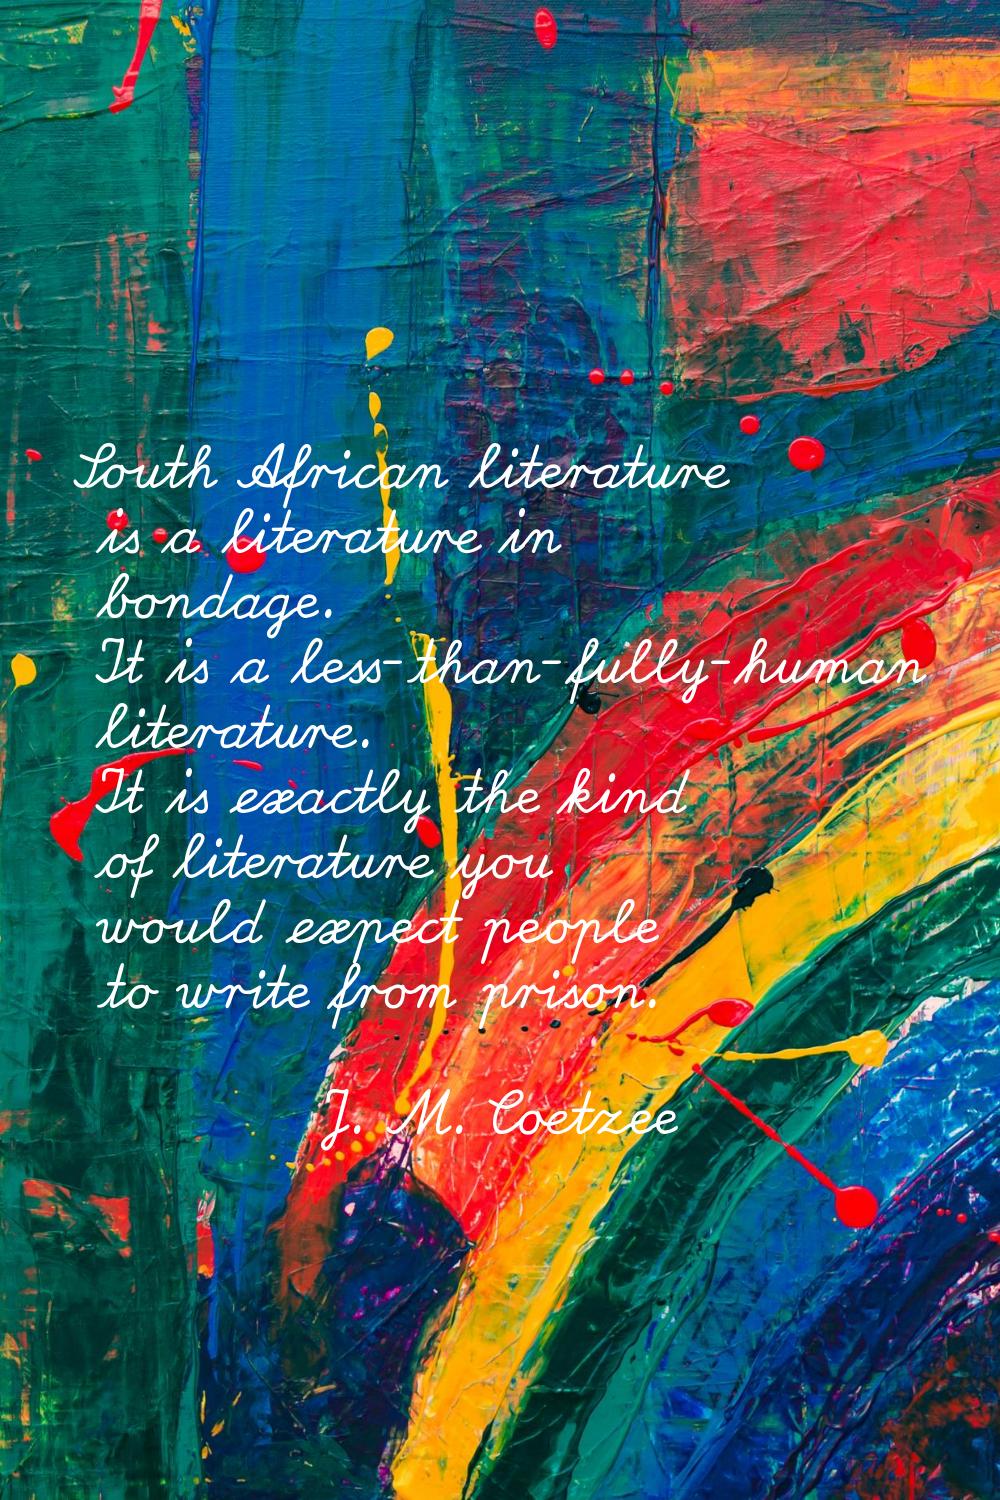 South African literature is a literature in bondage. It is a less-than-fully-human literature. It i